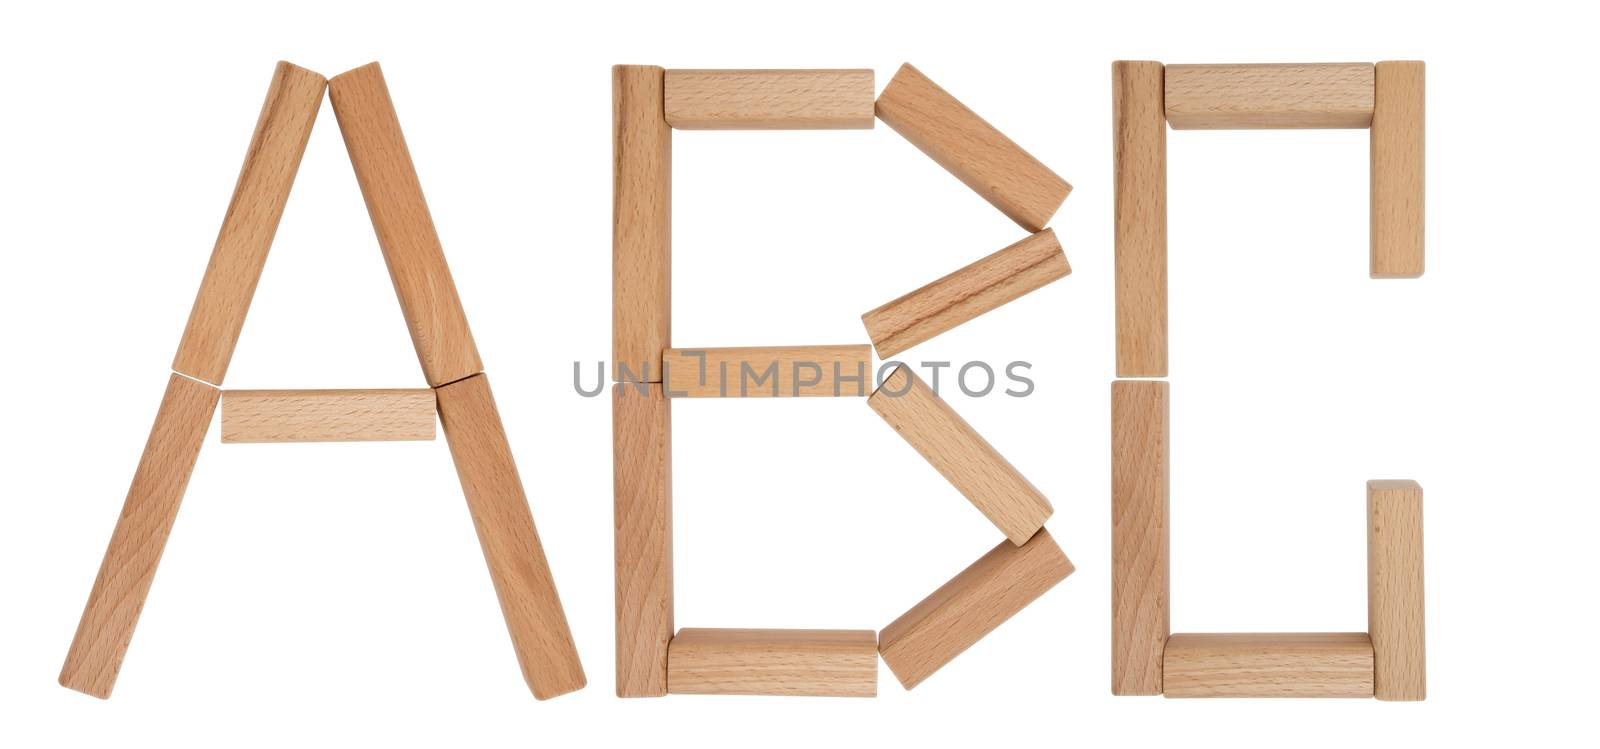 Alphabet letters of wooden toy blocks isolated on white background. Clipping path included.